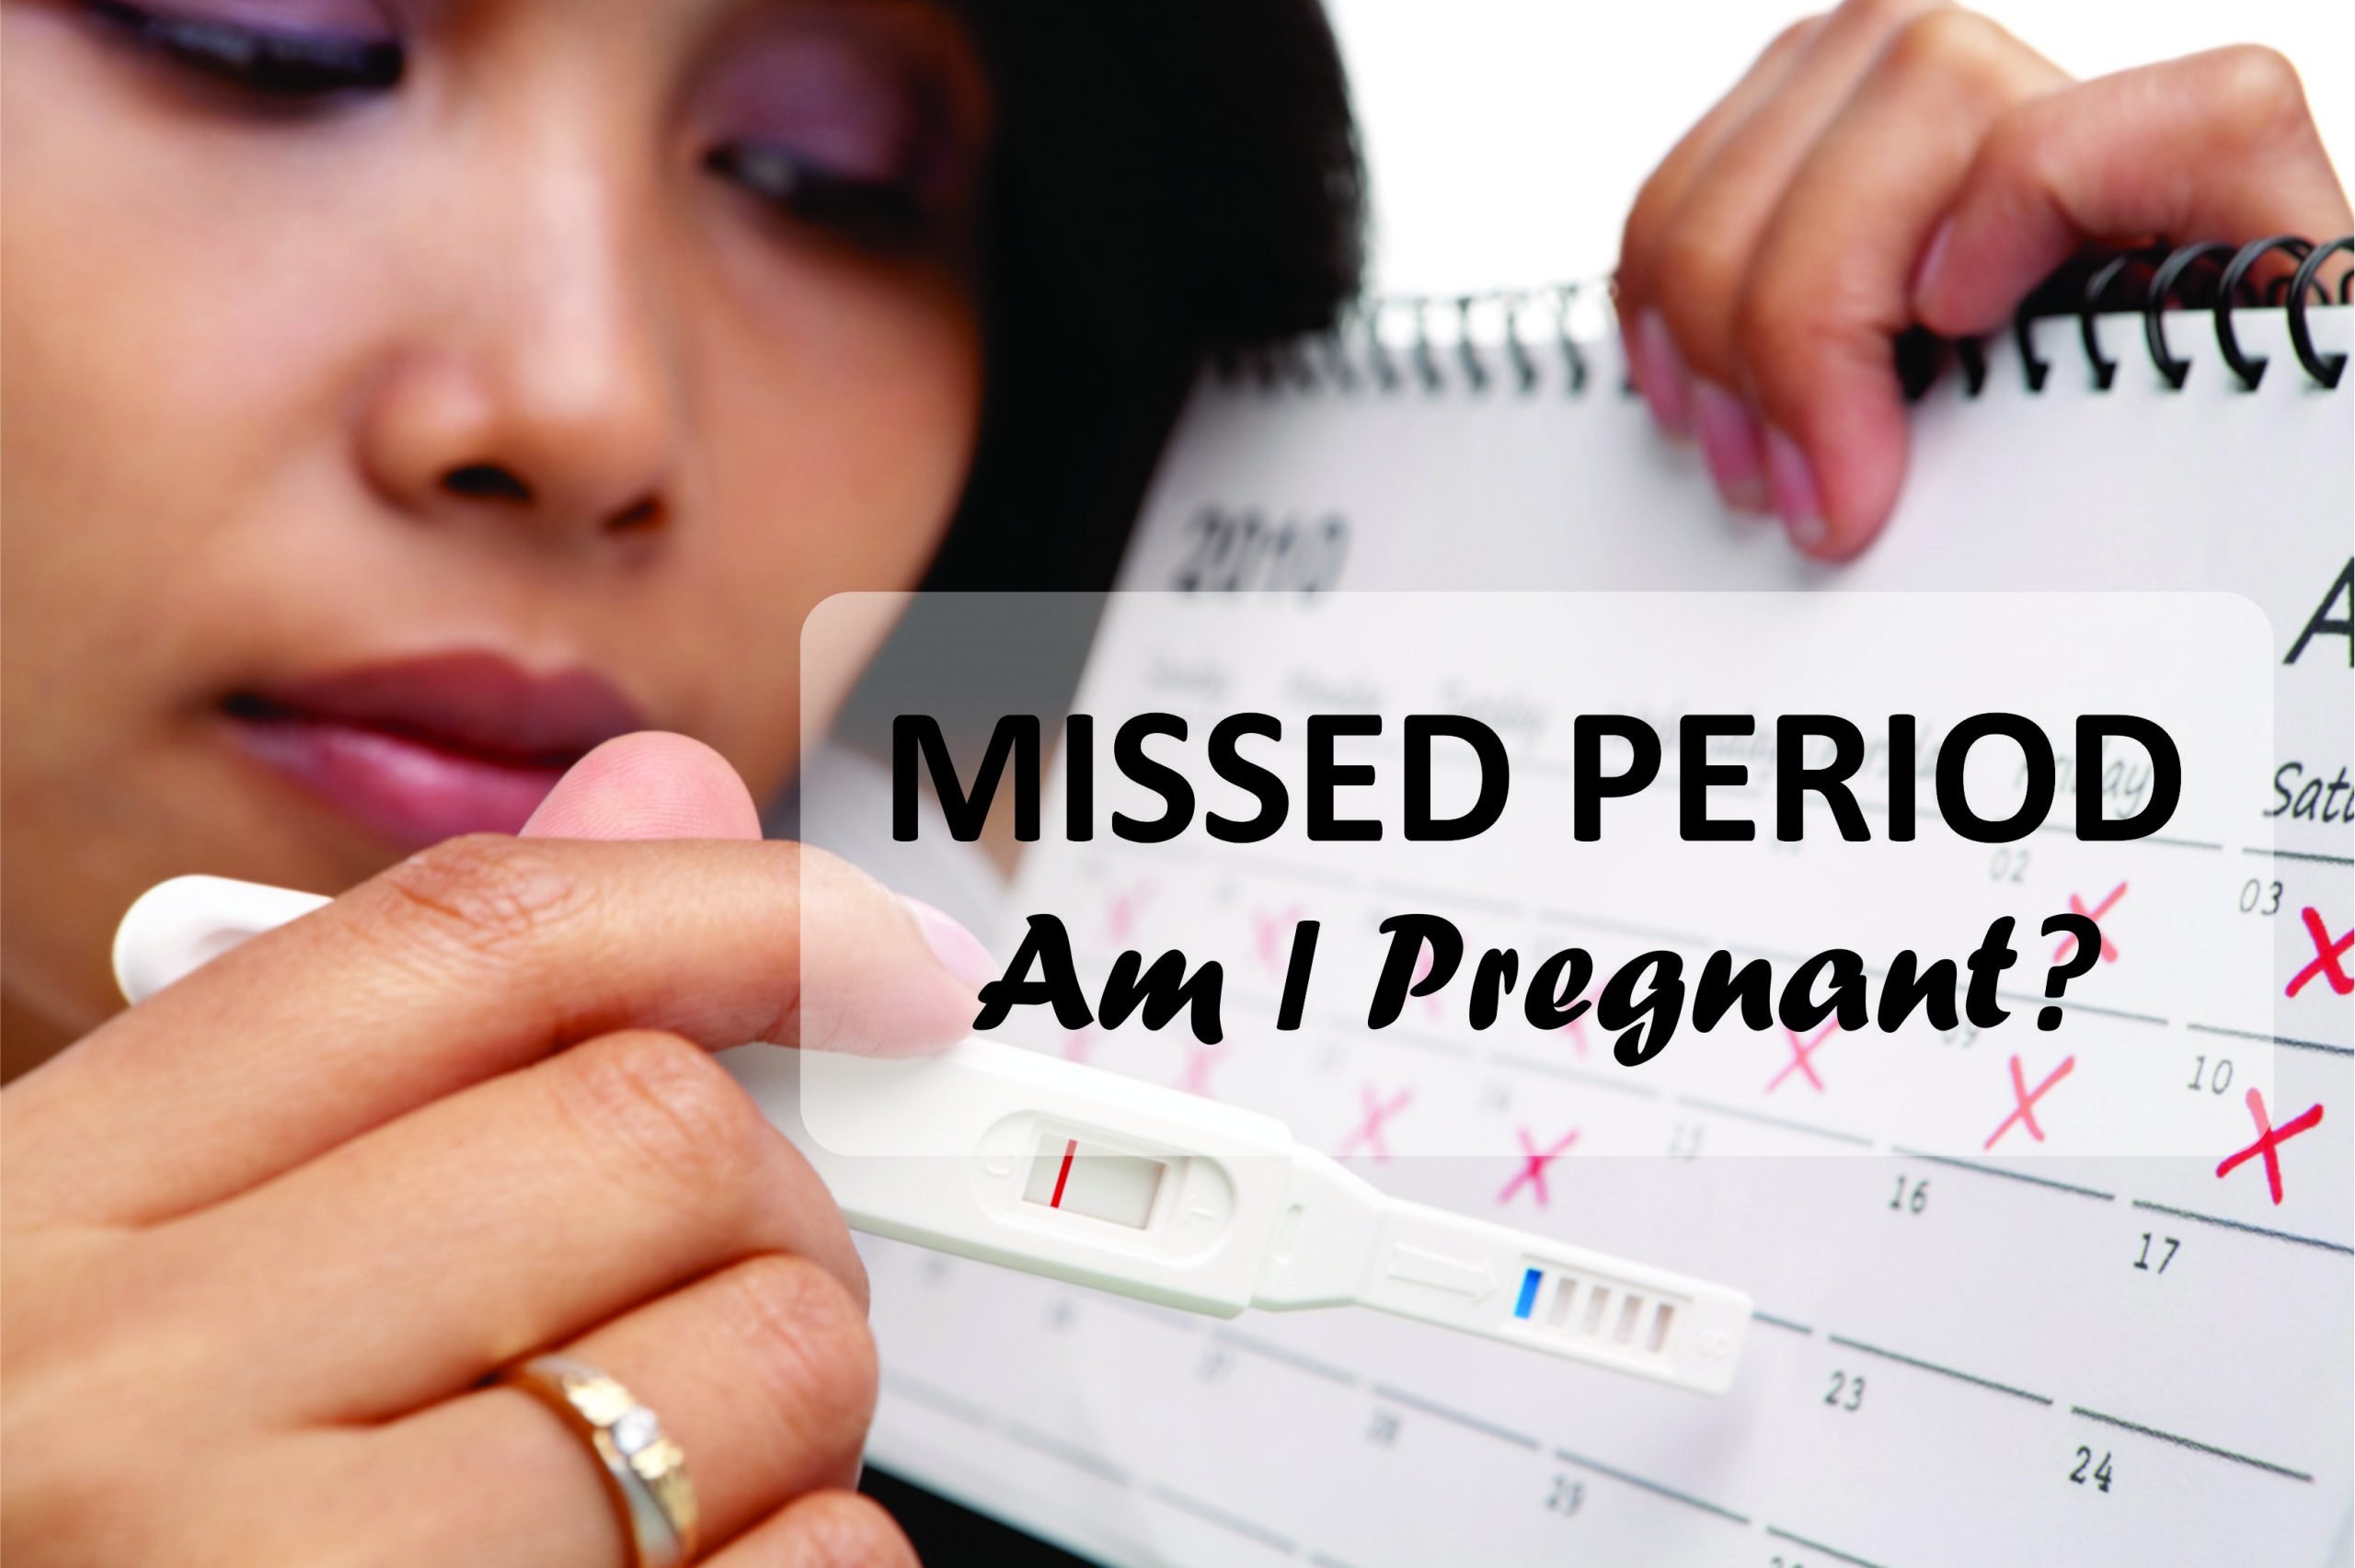 MISSED PERIOD! Am I Pregnant? â Carrot Top Drugs Limited